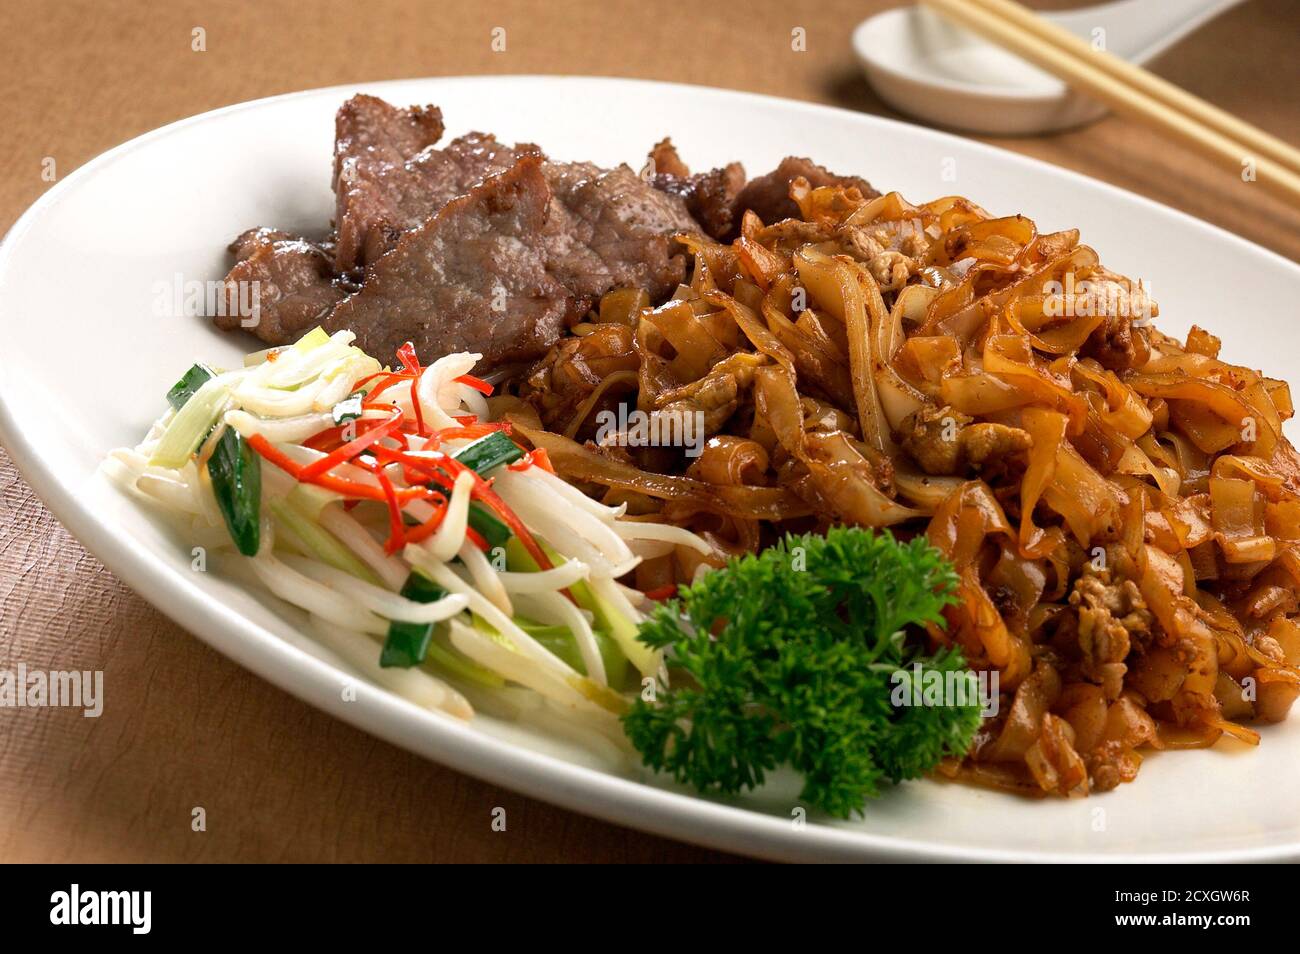 Asian cuisine stir fry noodles with beef and bean sprout Stock Photo